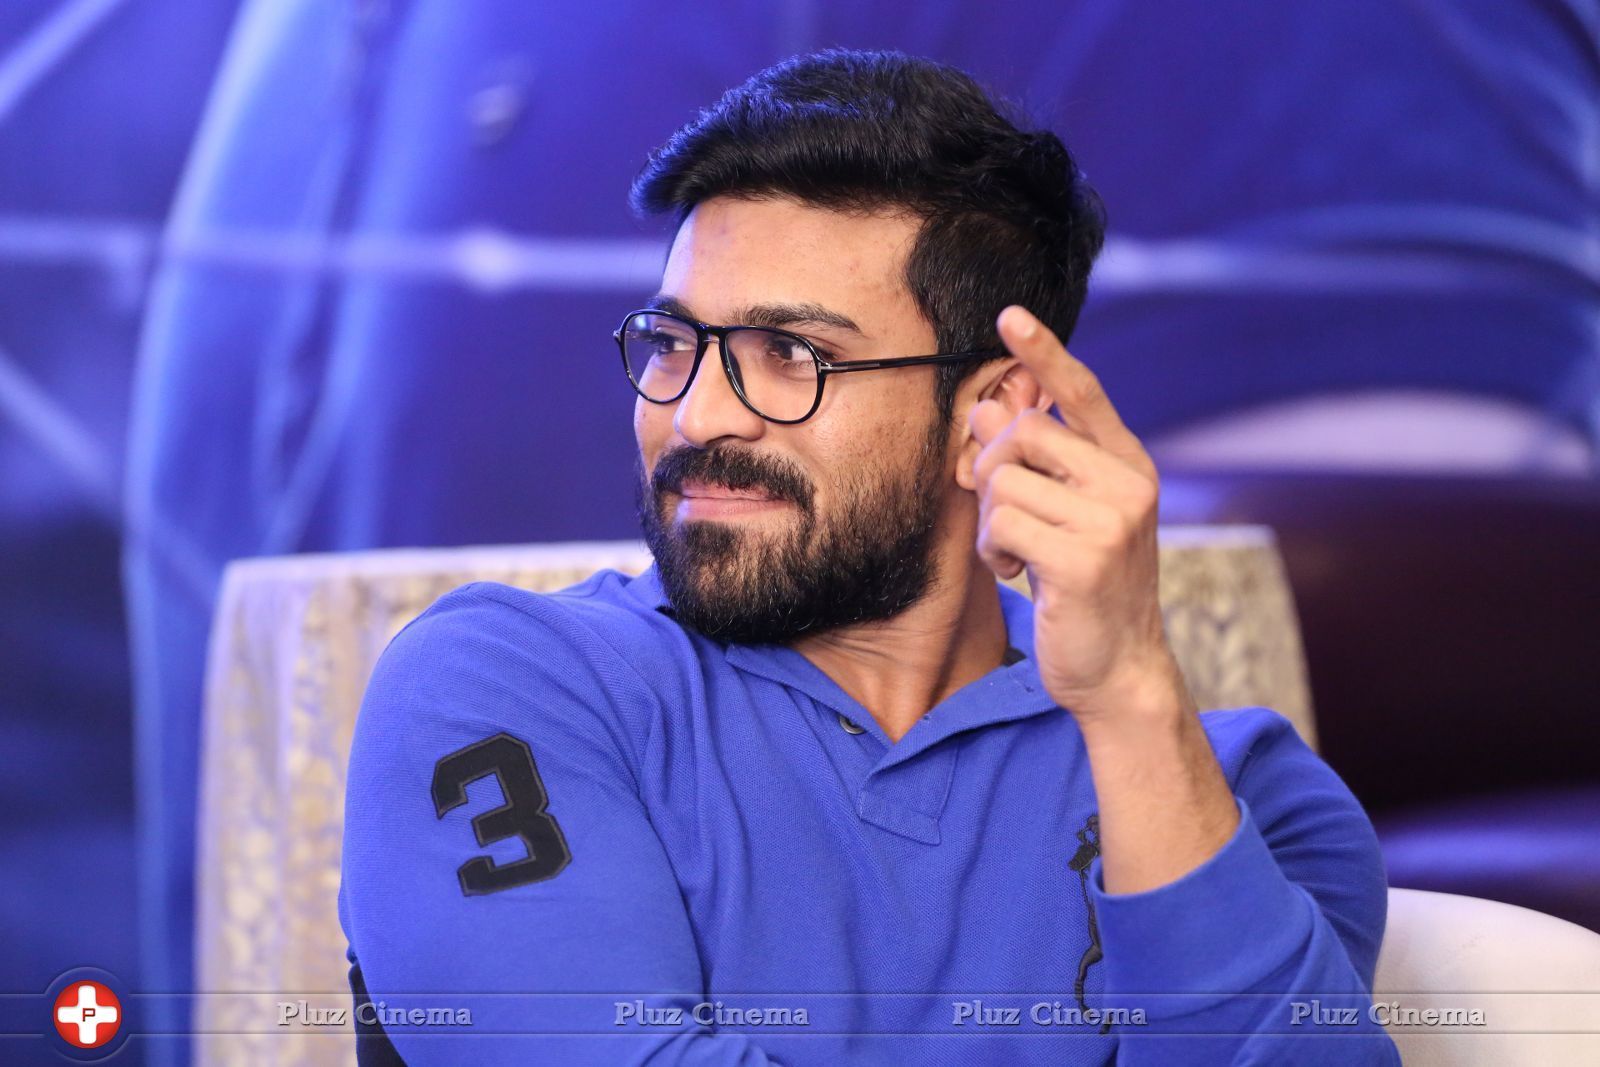 Ram Charan Interview For Dhruva Photos | Picture 1444650